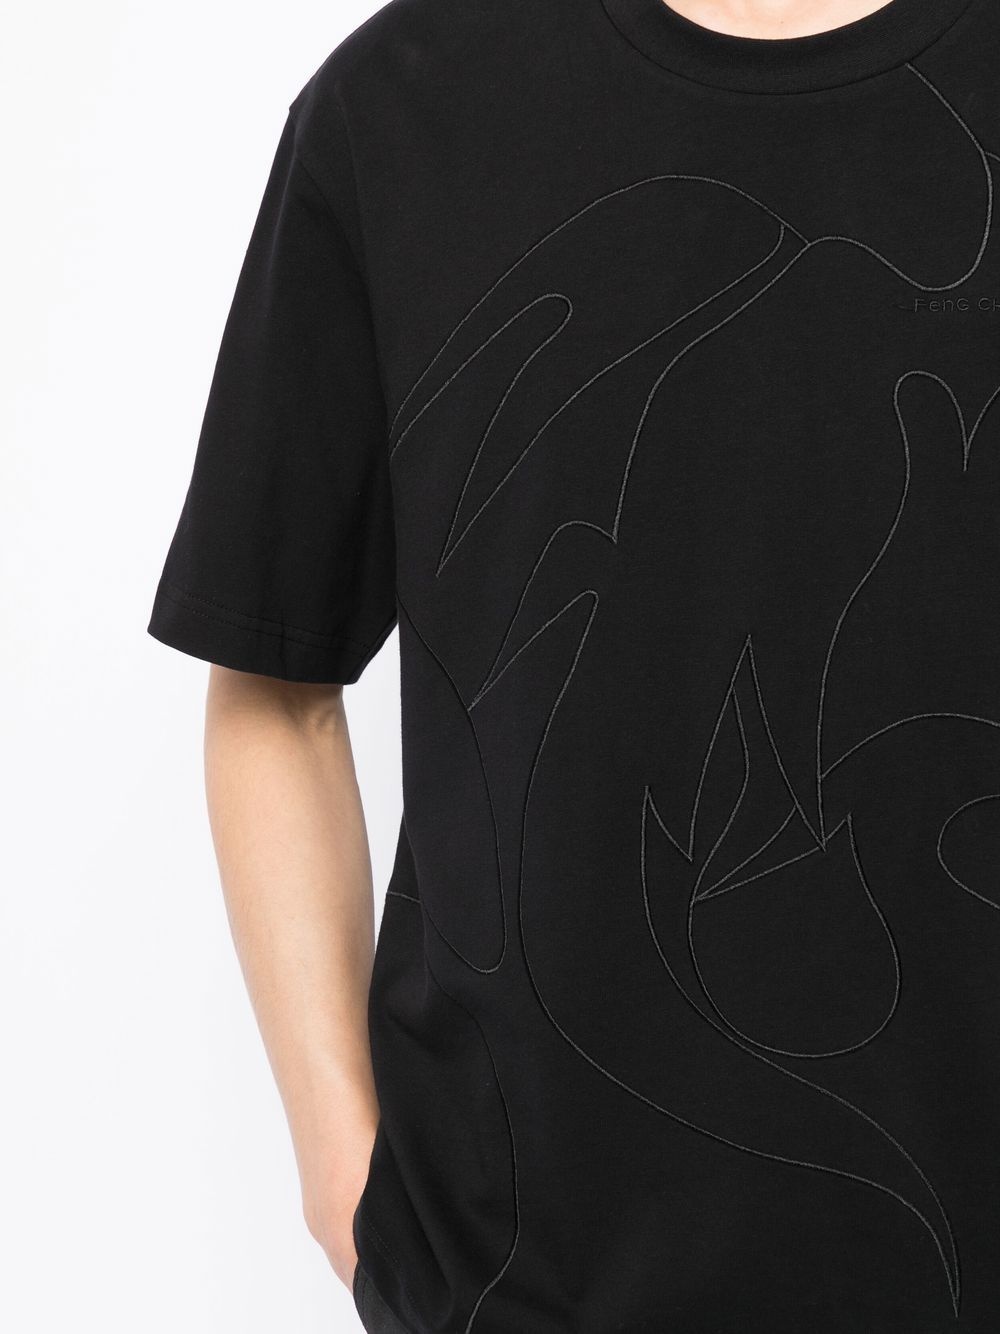 Phoenix embroidered T-shirt - 6